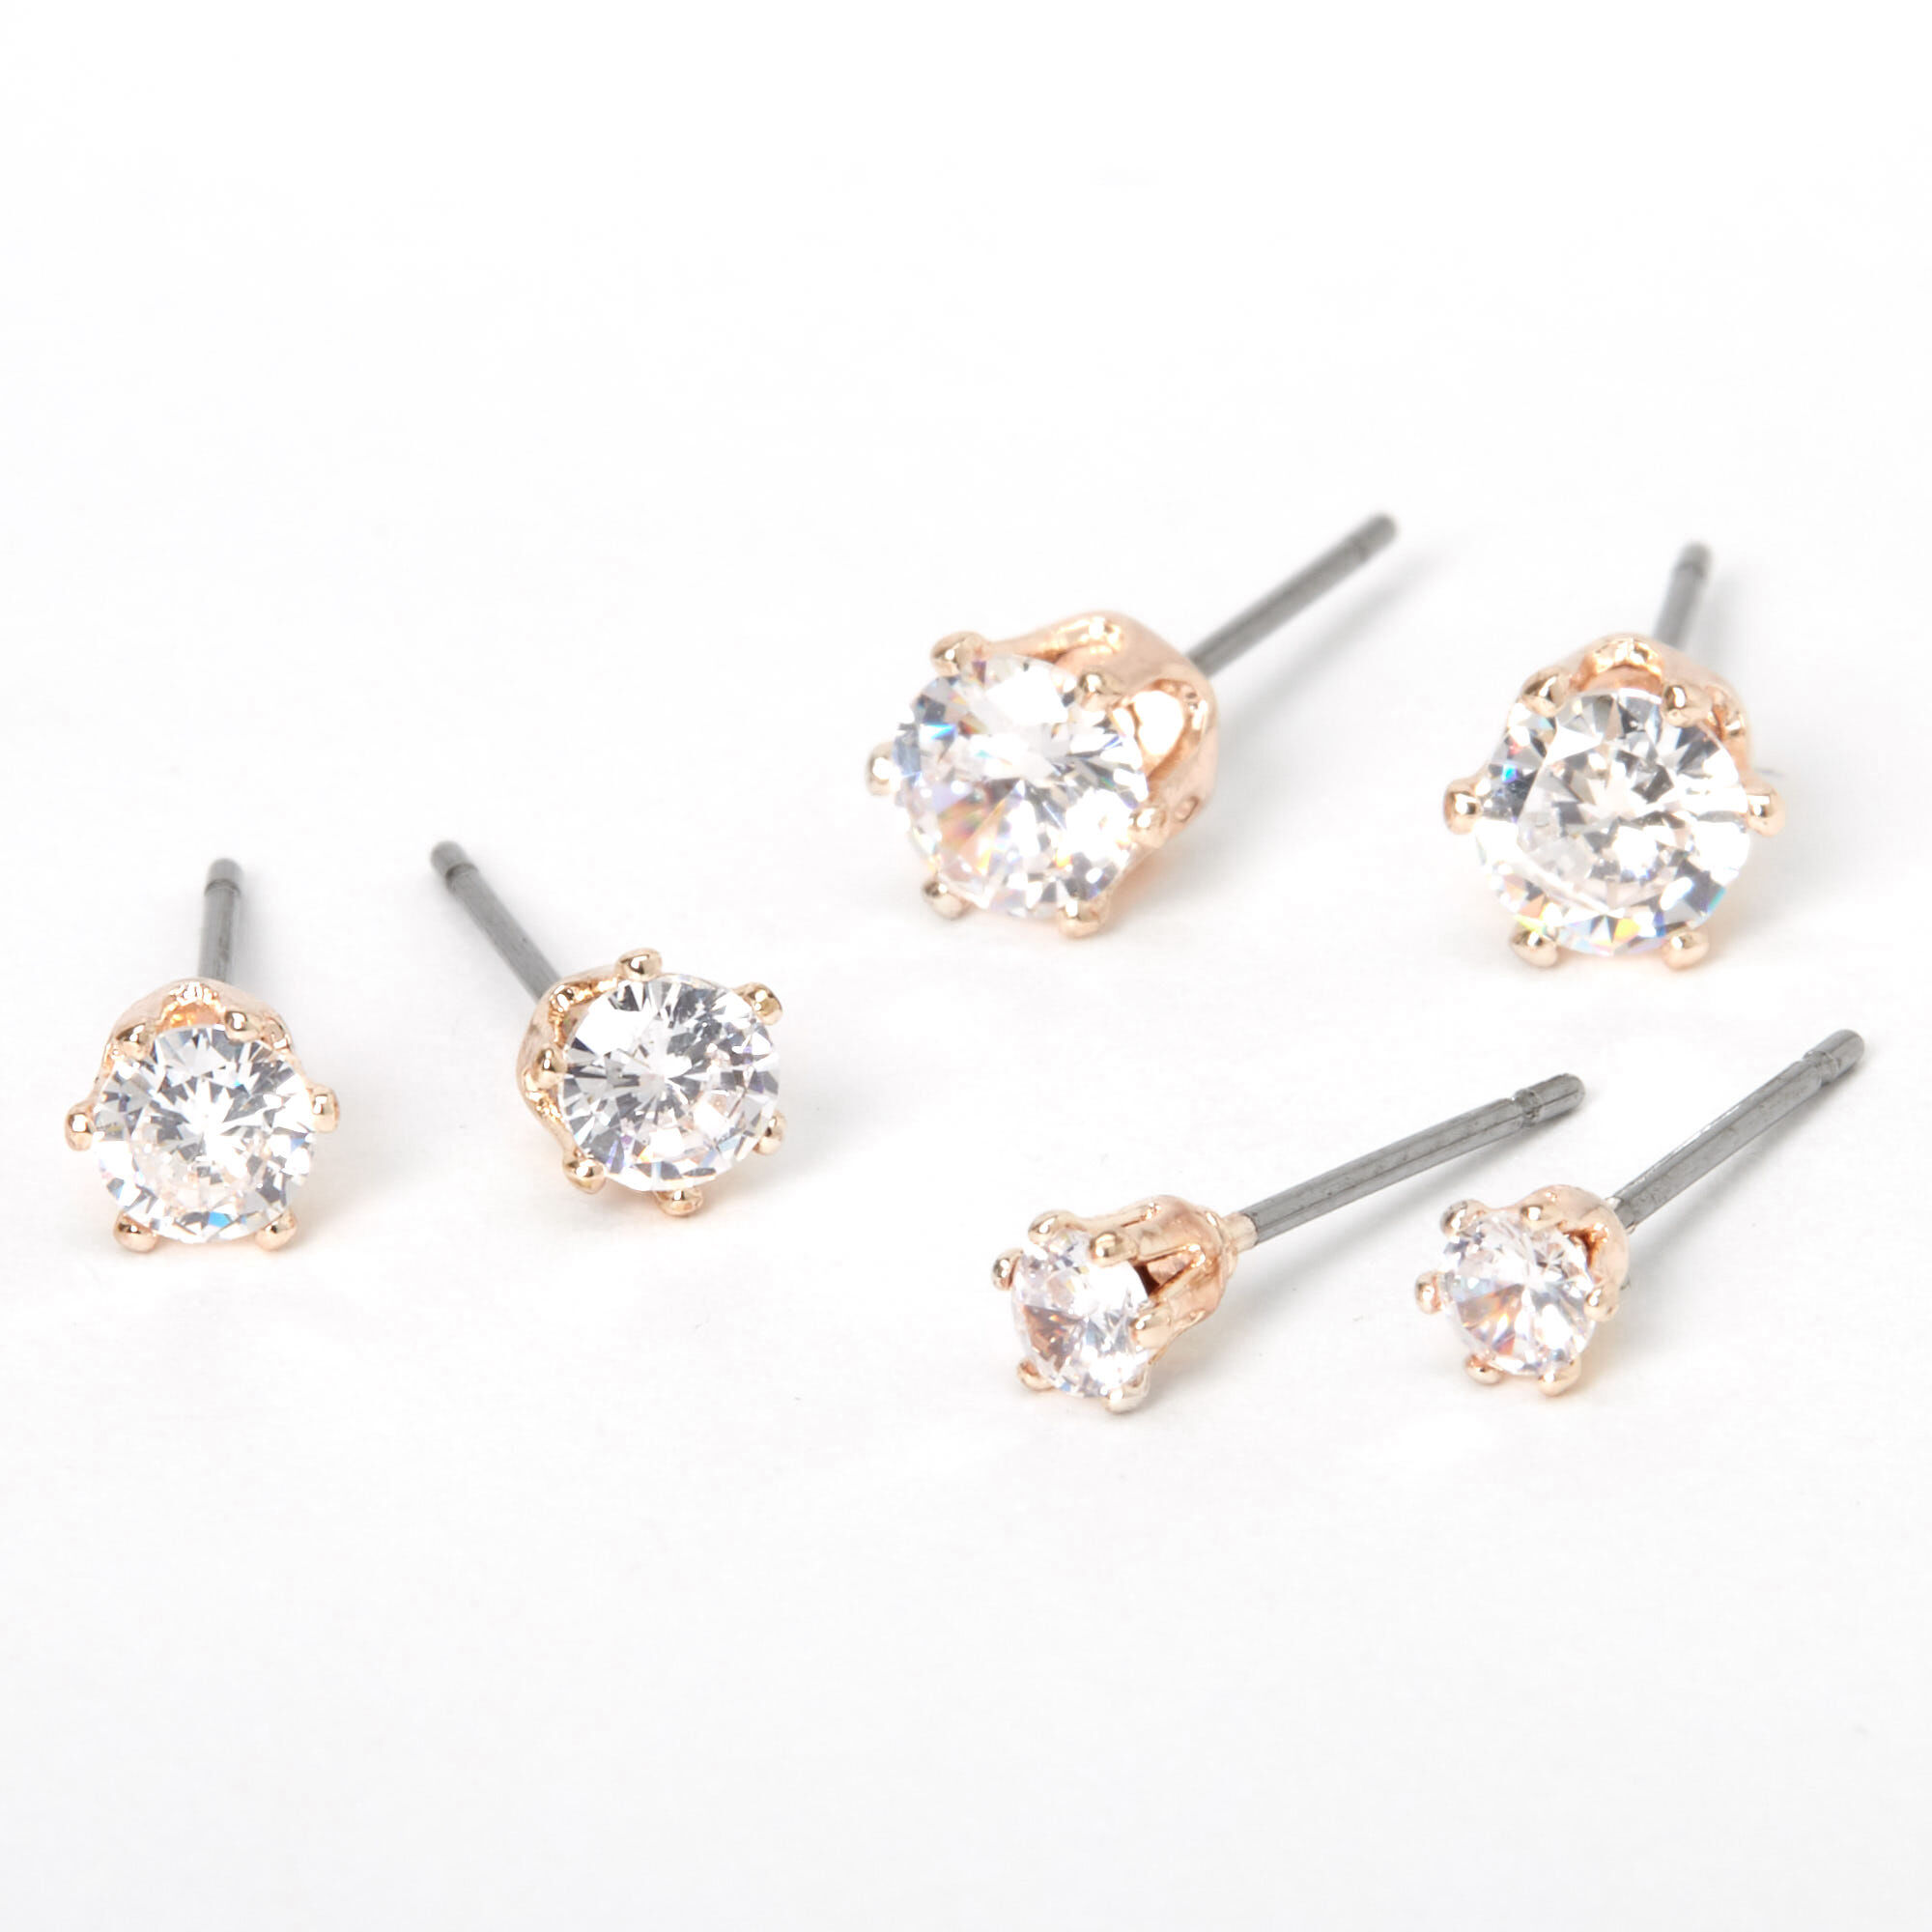 MOOCHI Silver/Gold/Rose Plated Brass Round Cubic Zirconia Stud Pieced Earrings 3mm-8mm Pack of 6 Pairs 